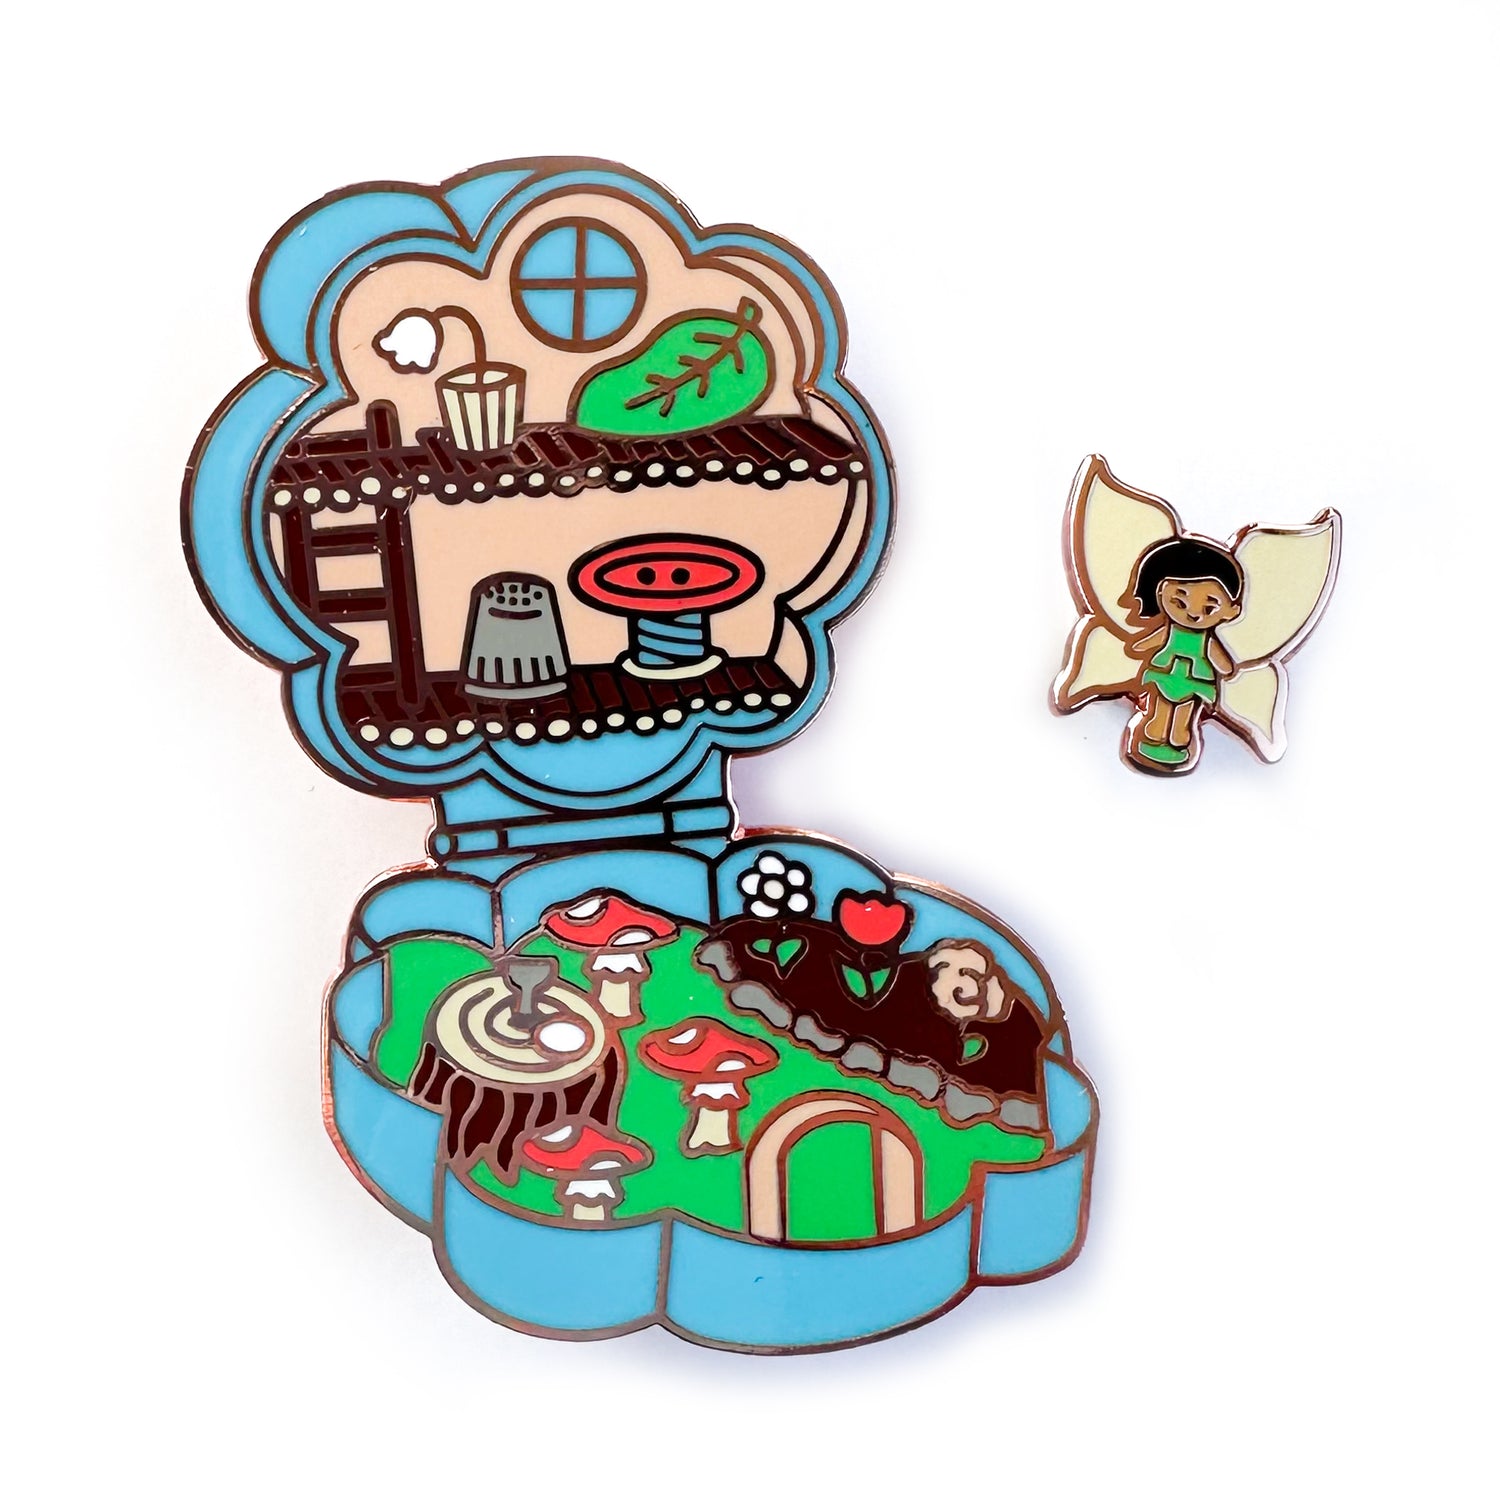 Two enamel pins, one of a small fairy doll in a green dress, the other of a flower compact set up as a fairy dollhouse with mushrooms and flowers. 